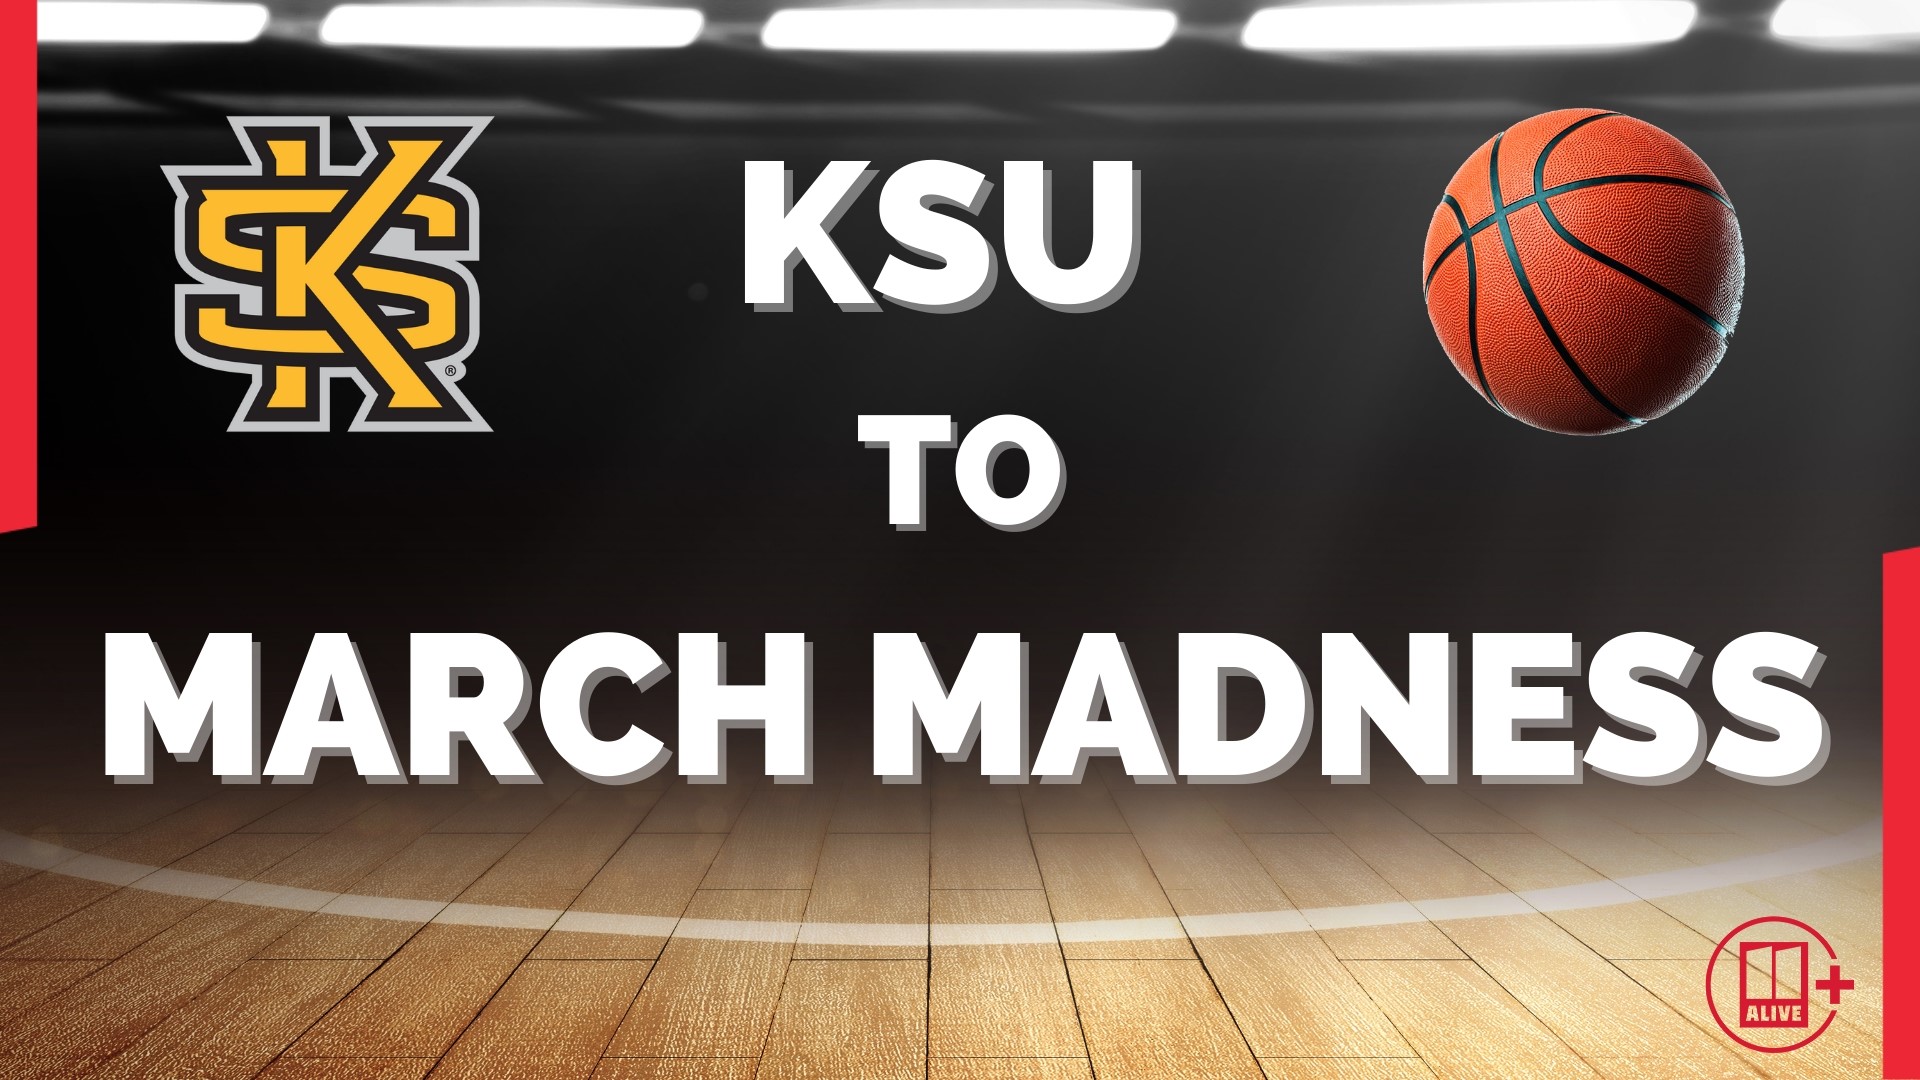 Kennesaw State University is headed to the big dance for the first time in school history.